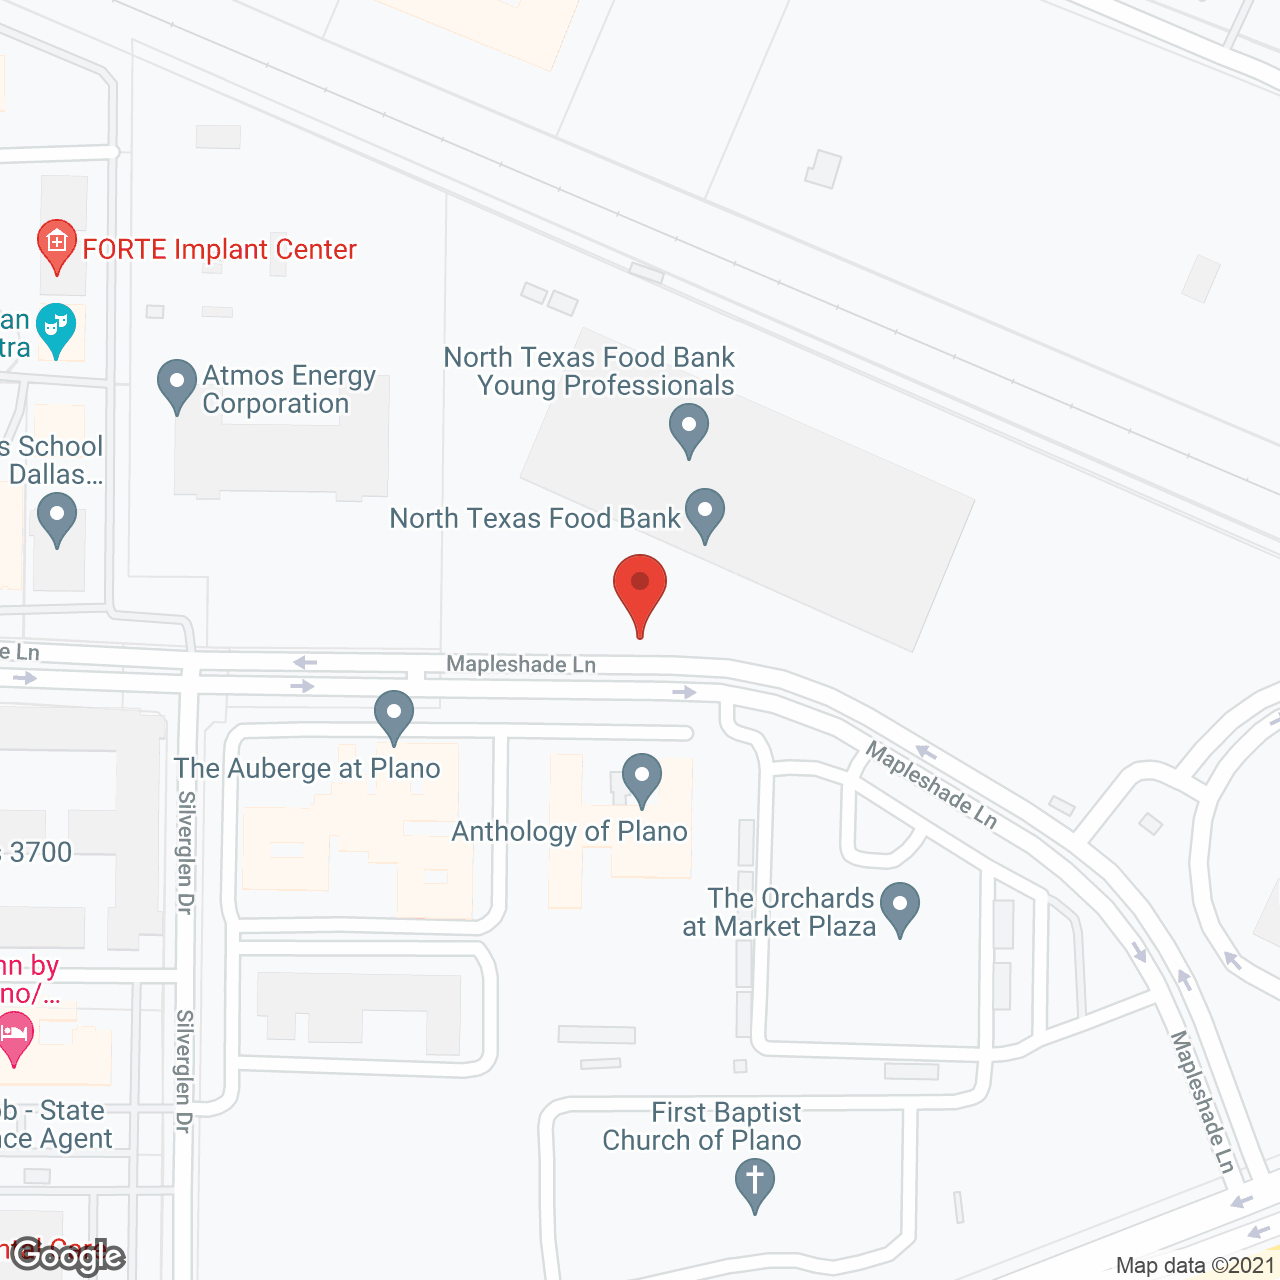 The Orchards at Market Plaza in google map